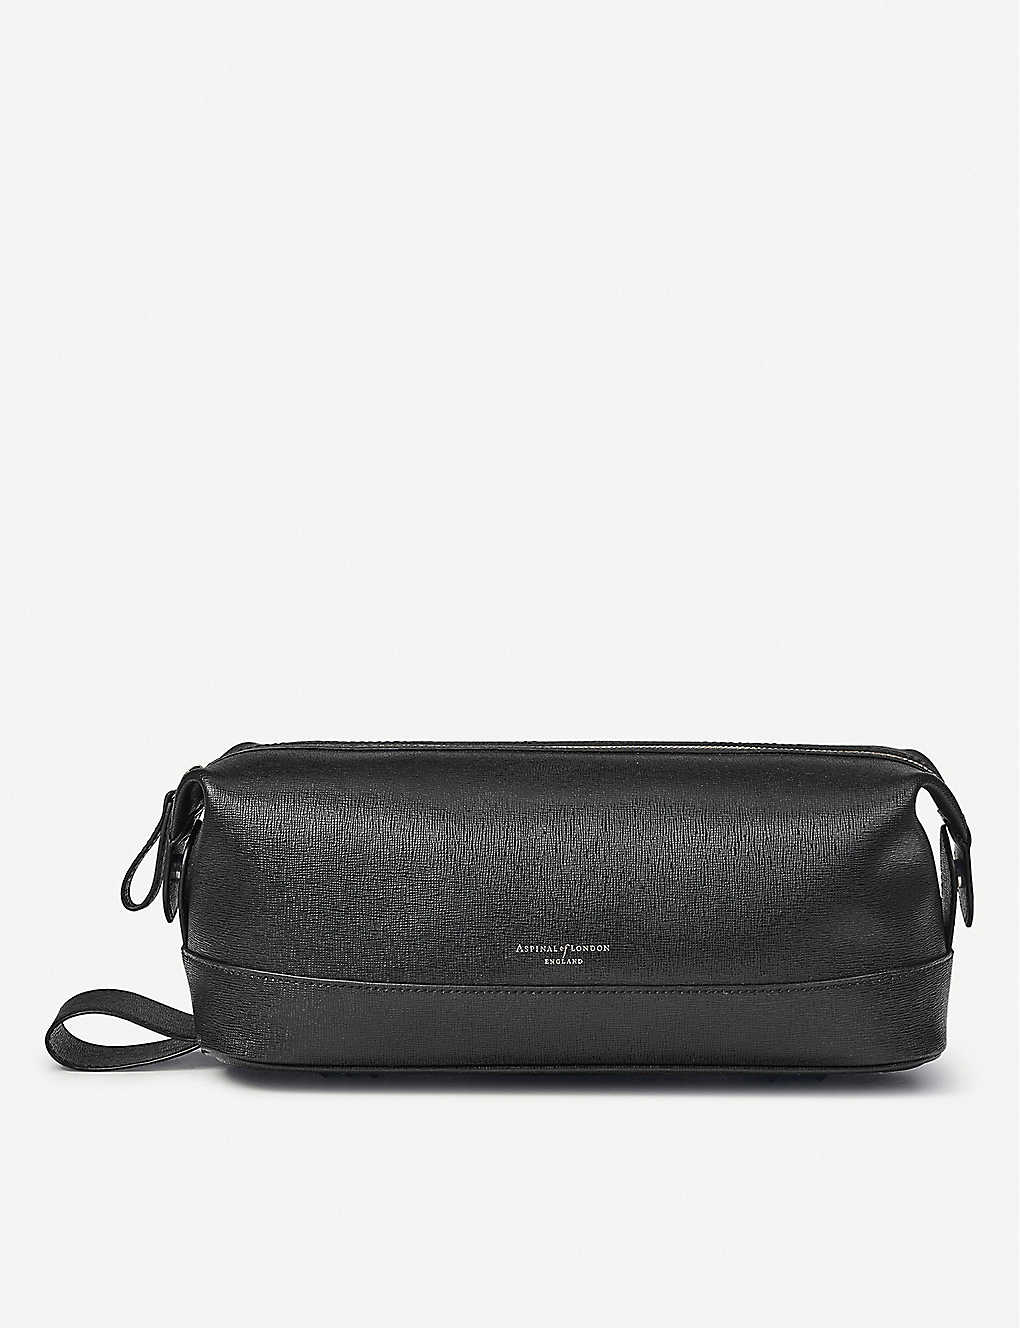 Aspinal Of London Classic Zipped Leather Washbag